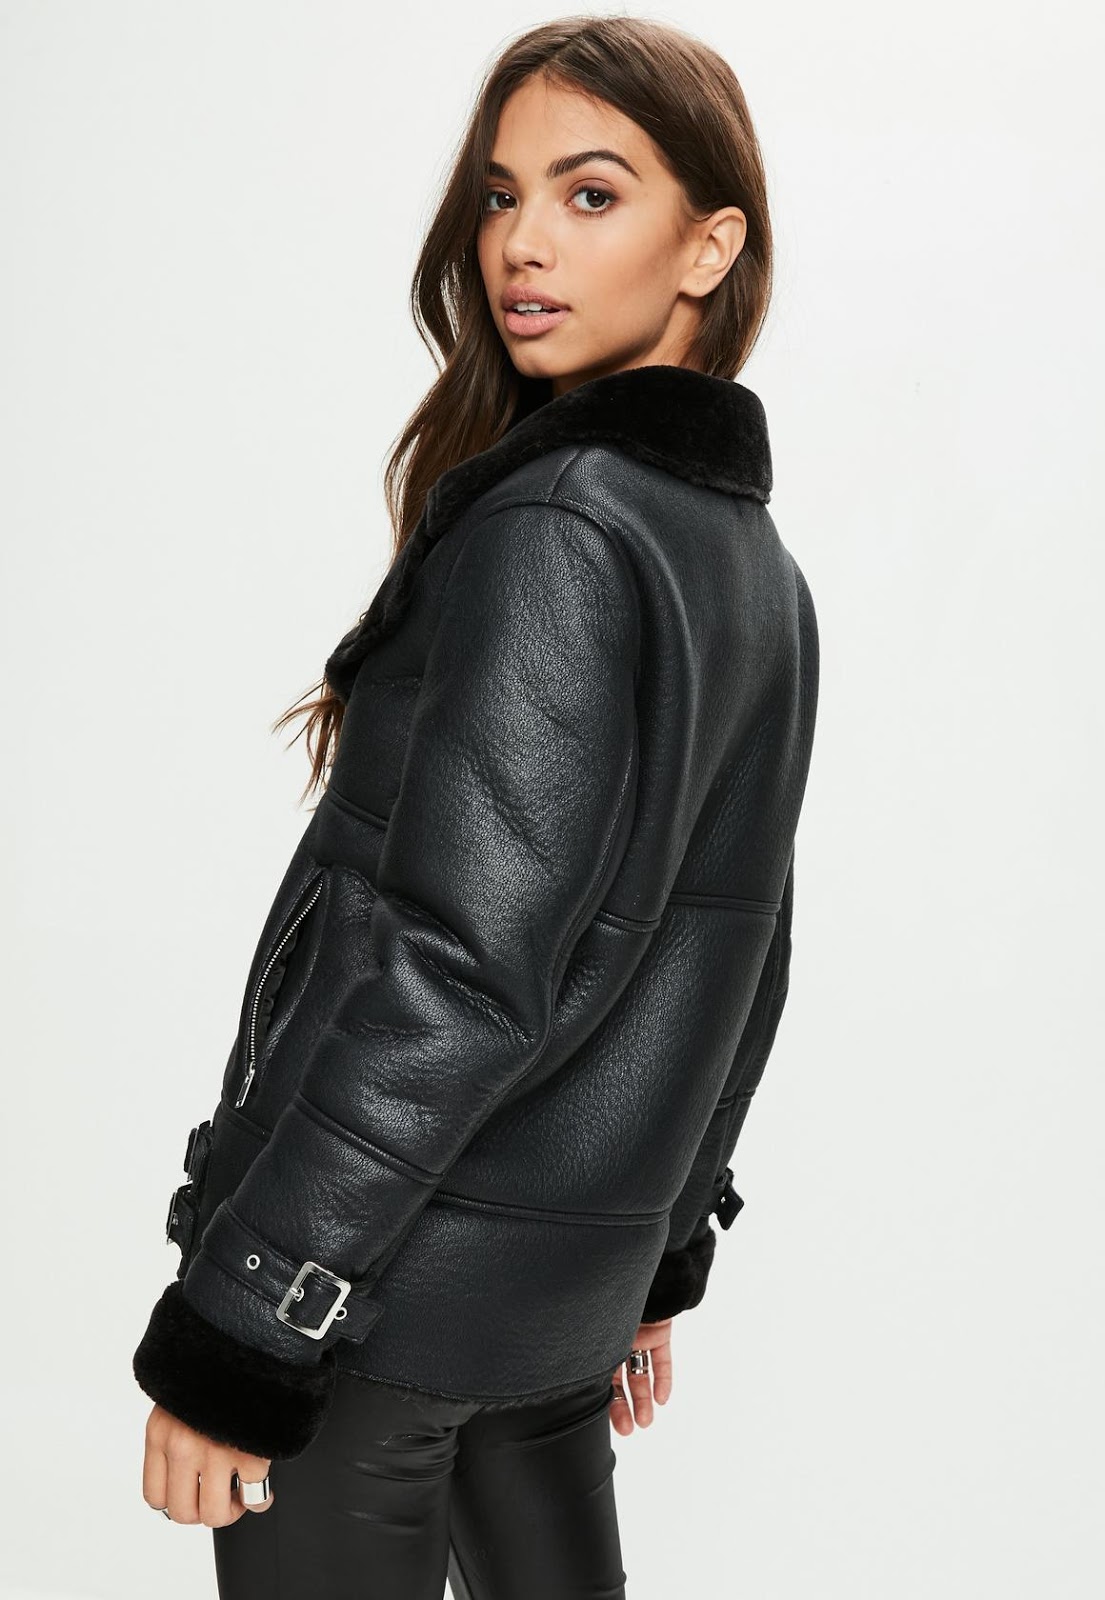 Leather Beauties: 